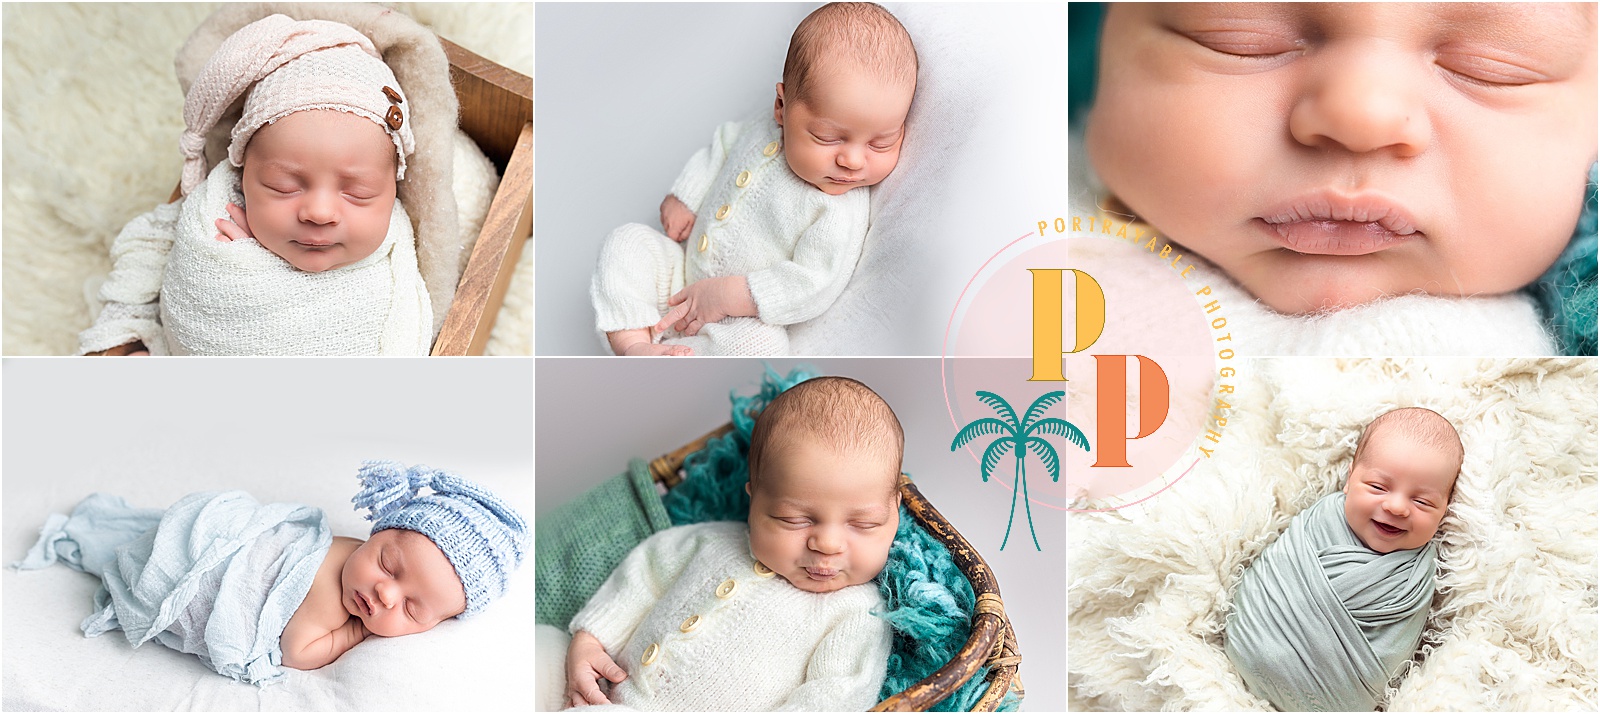 Capturing precious moments: Orlando baby photographer showcasing adorable infant smiles and joy-filled memories.